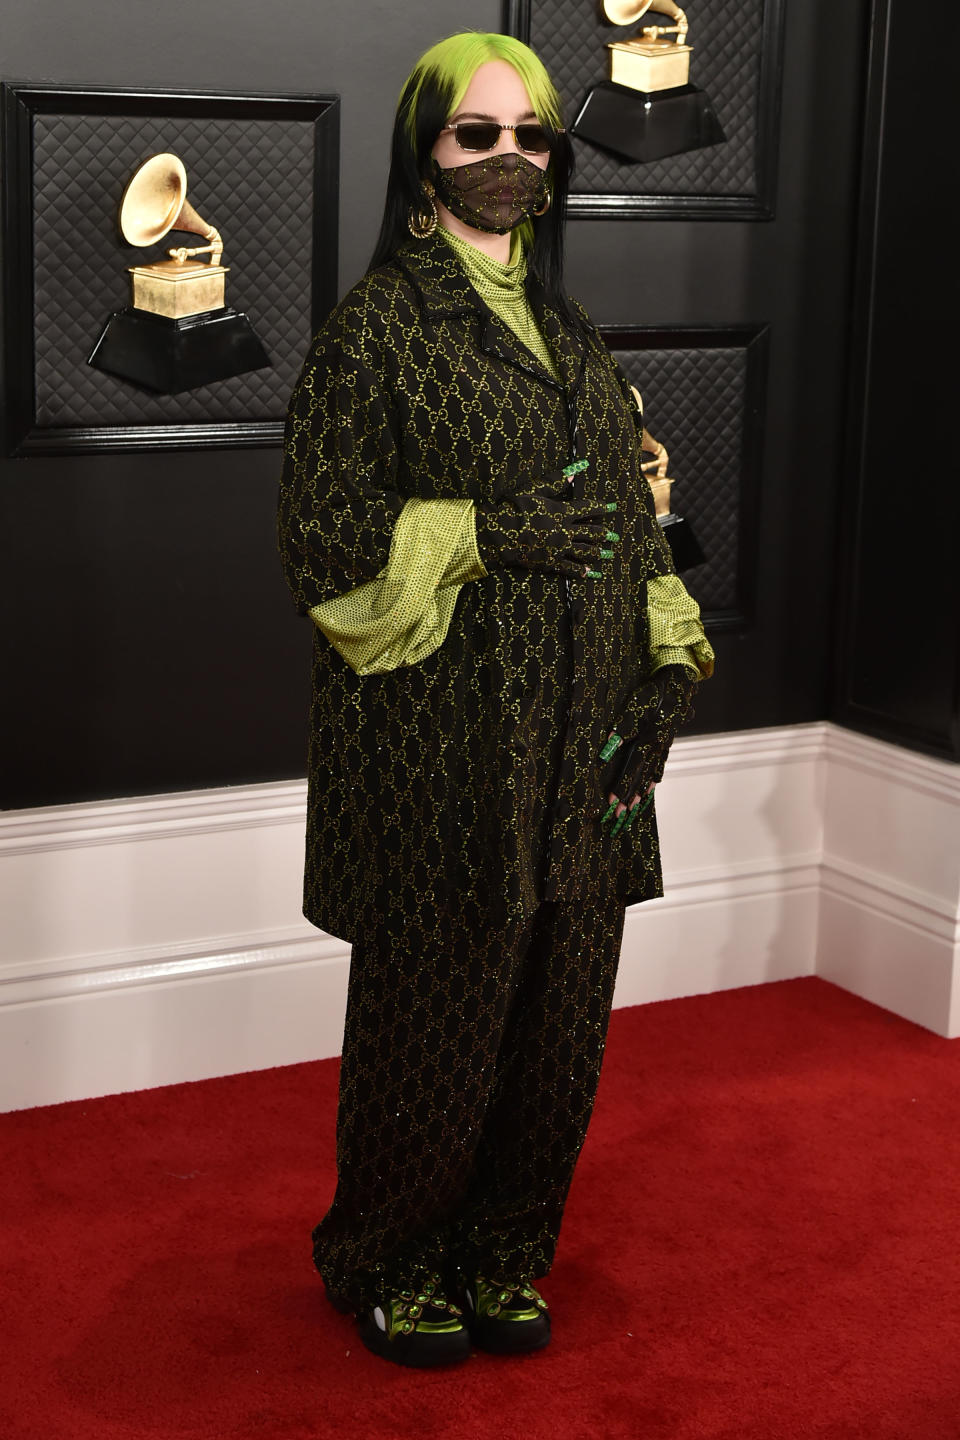 LOS ANGELES, CA - JANUARY 26: Billie Eilish attends the 62nd Annual Grammy Awards at Staples Center on January 26, 2020 in Los Angeles, CA. (Photo by David Crotty/Patrick McMullan via Getty Images)